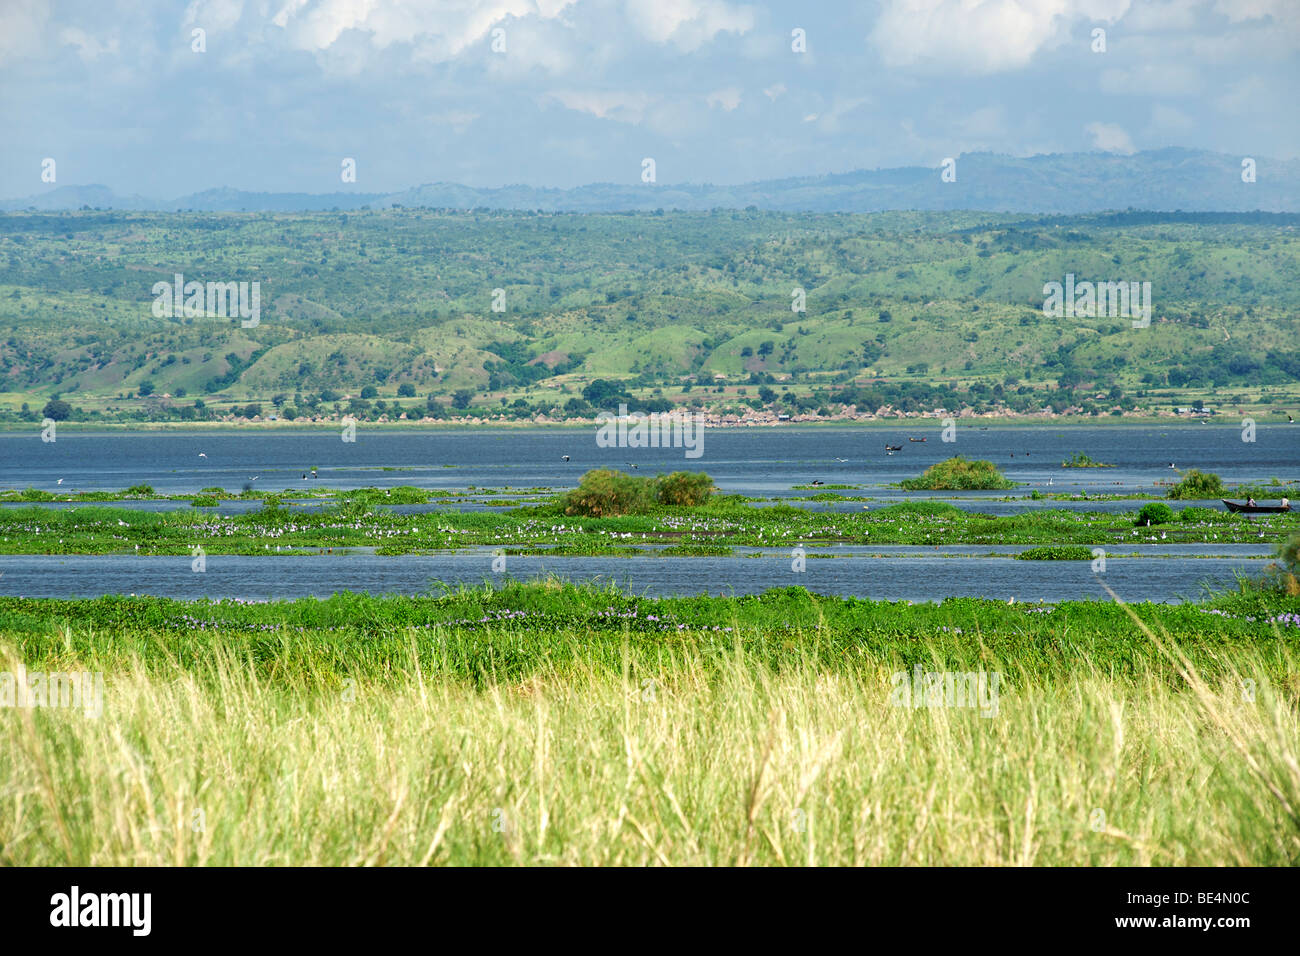 View of the Albert Nile River from the delta in Murchison Falls National Park in Uganda. Stock Photo